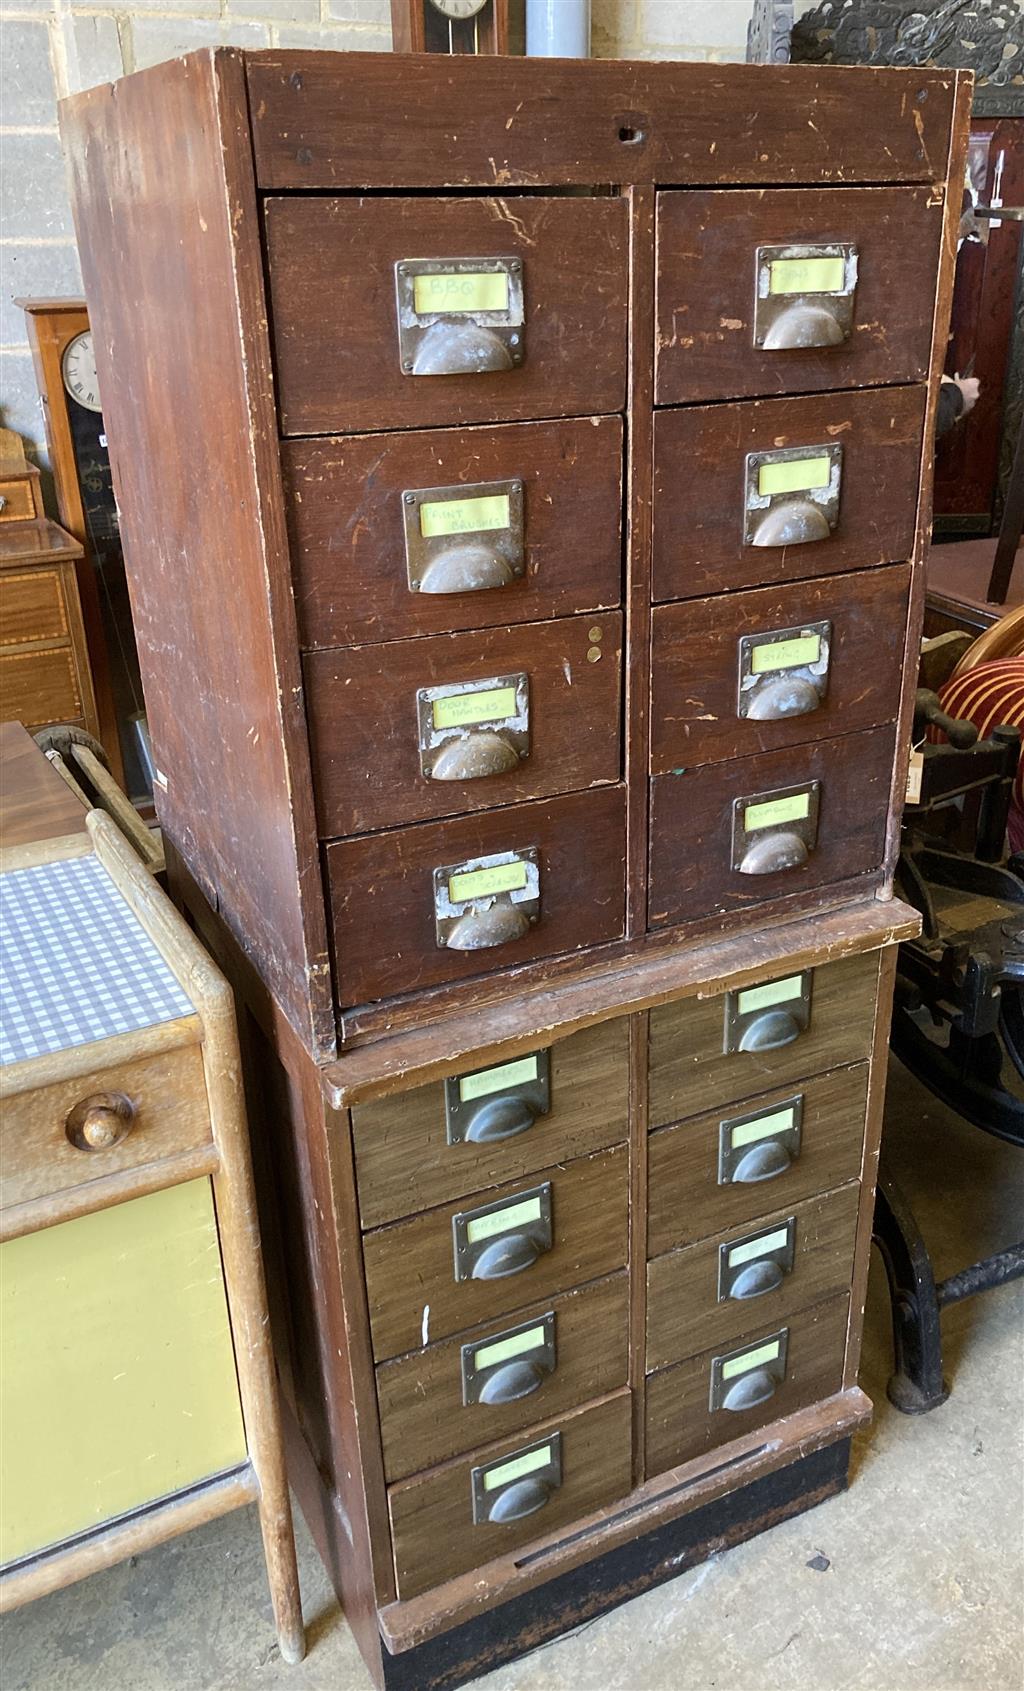 A pair of filing chests, width 61cm, depth 57cm, height 74cm